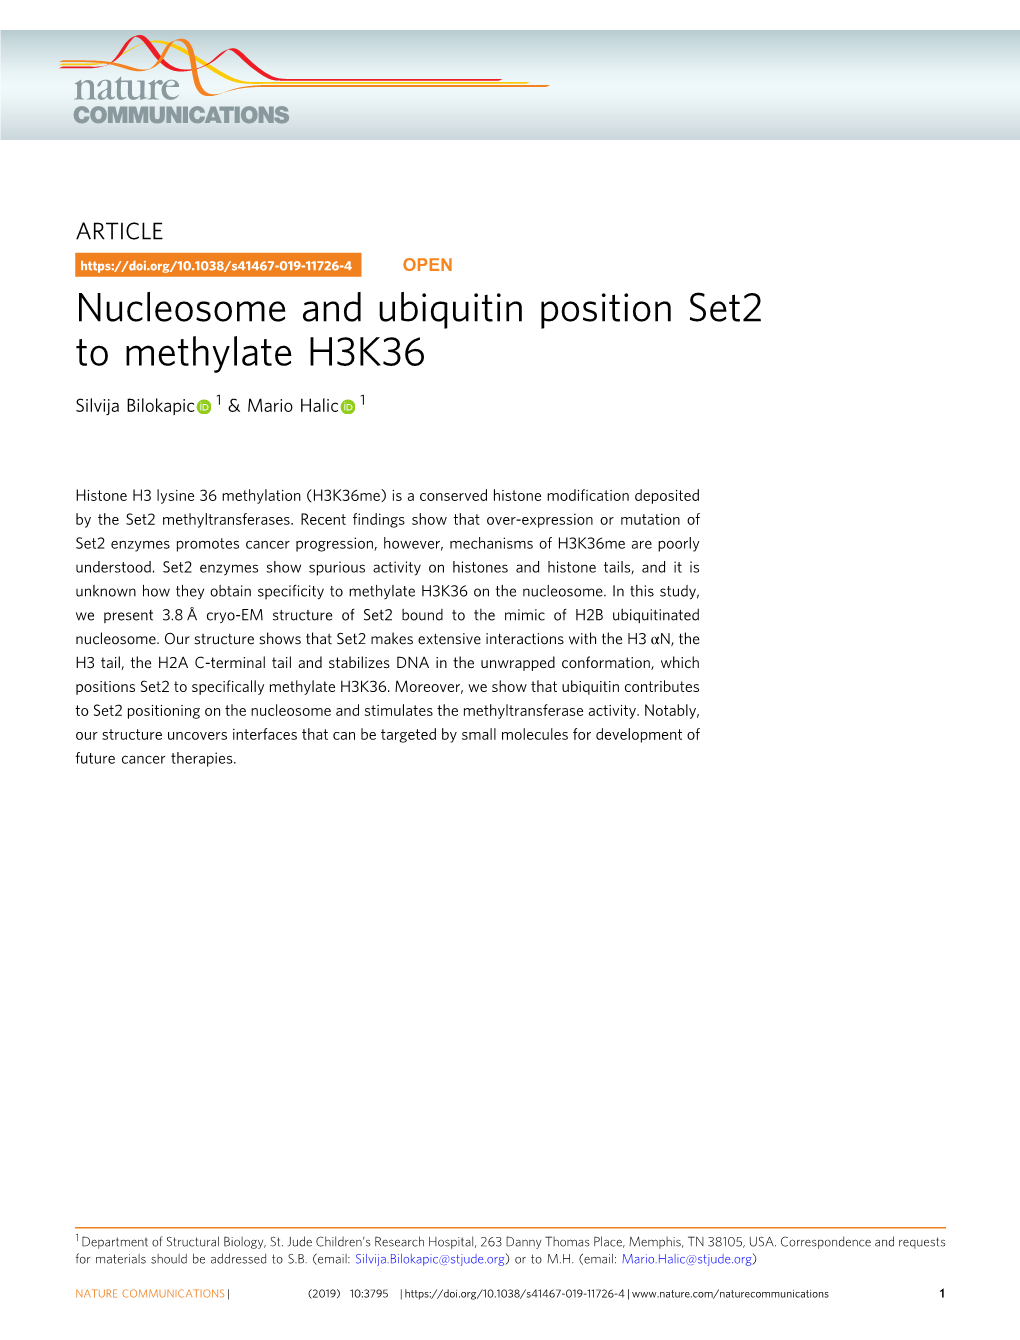 Nucleosome and Ubiquitin Position Set2 to Methylate H3K36